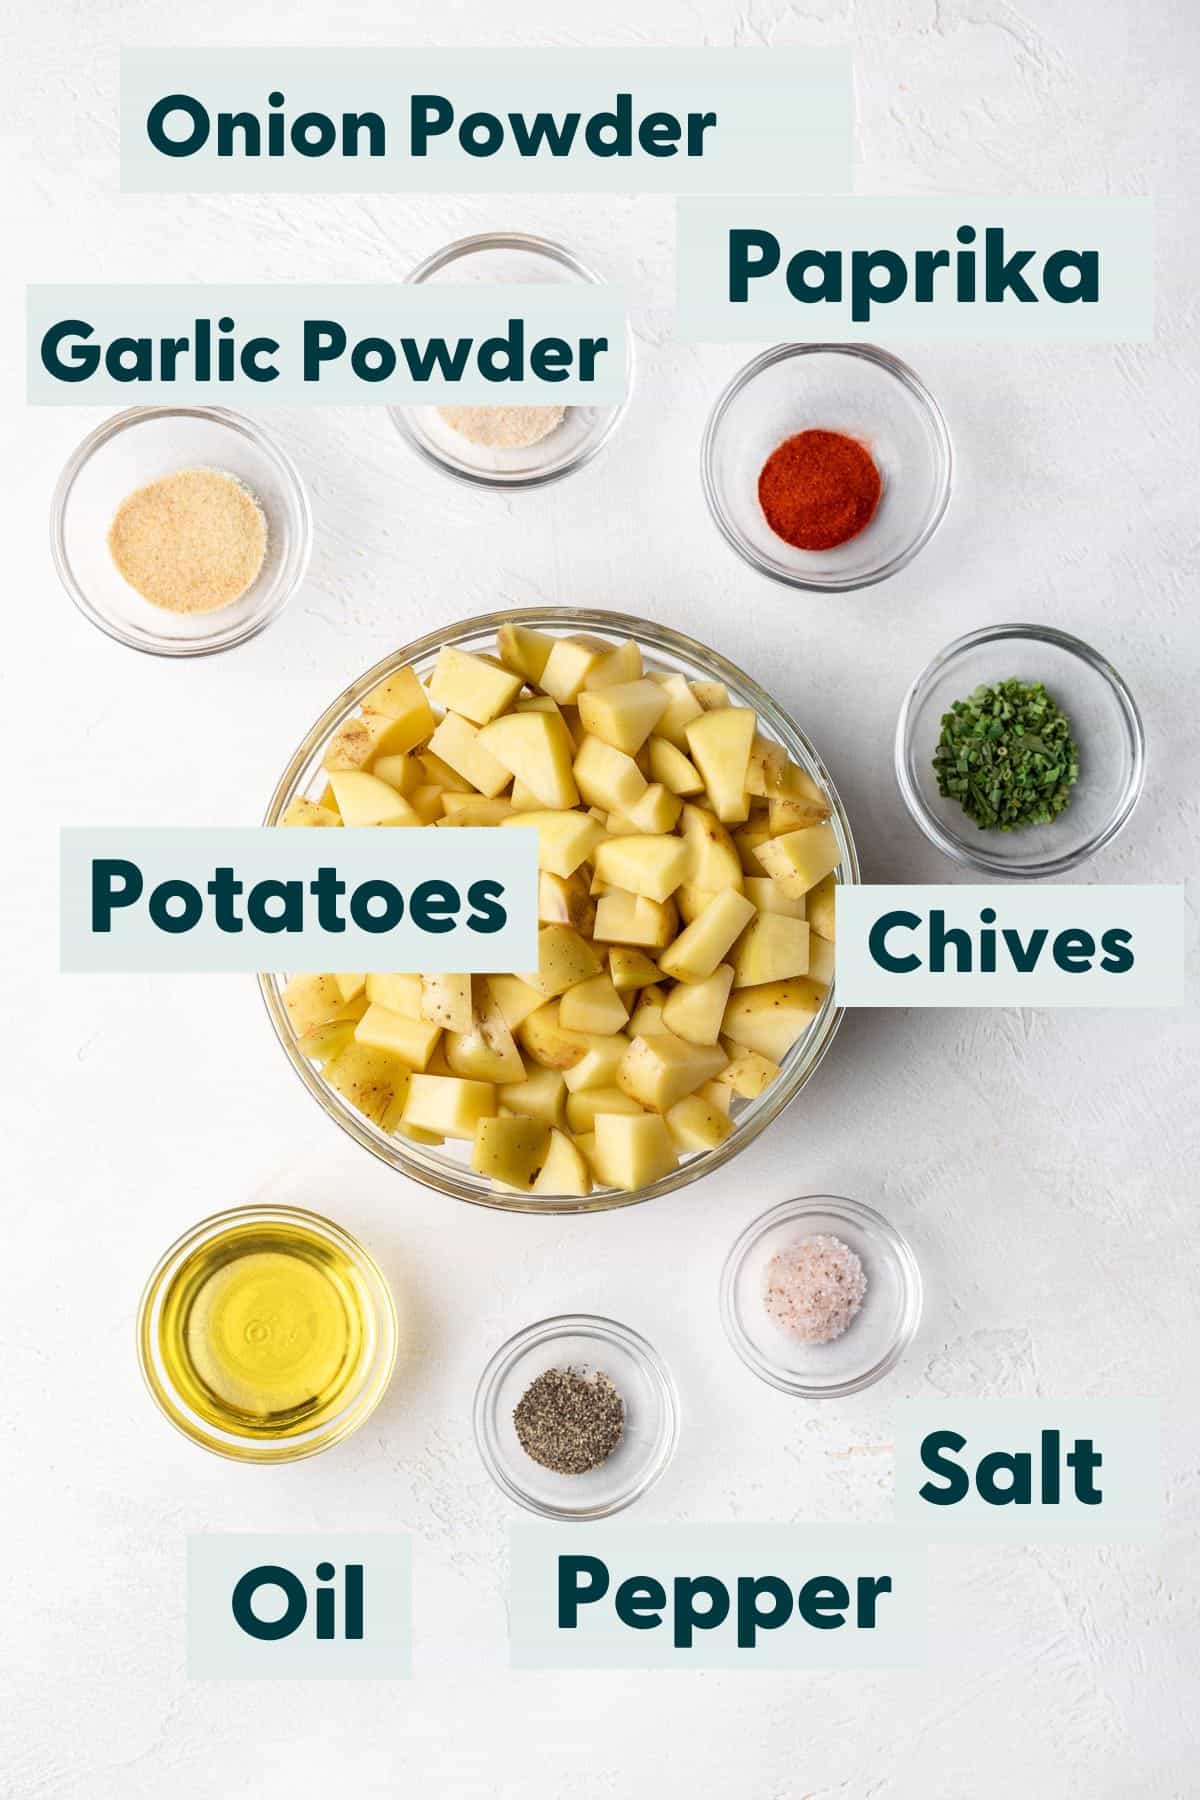 Ingredients to make potatoes with text overlay naming ingredients.